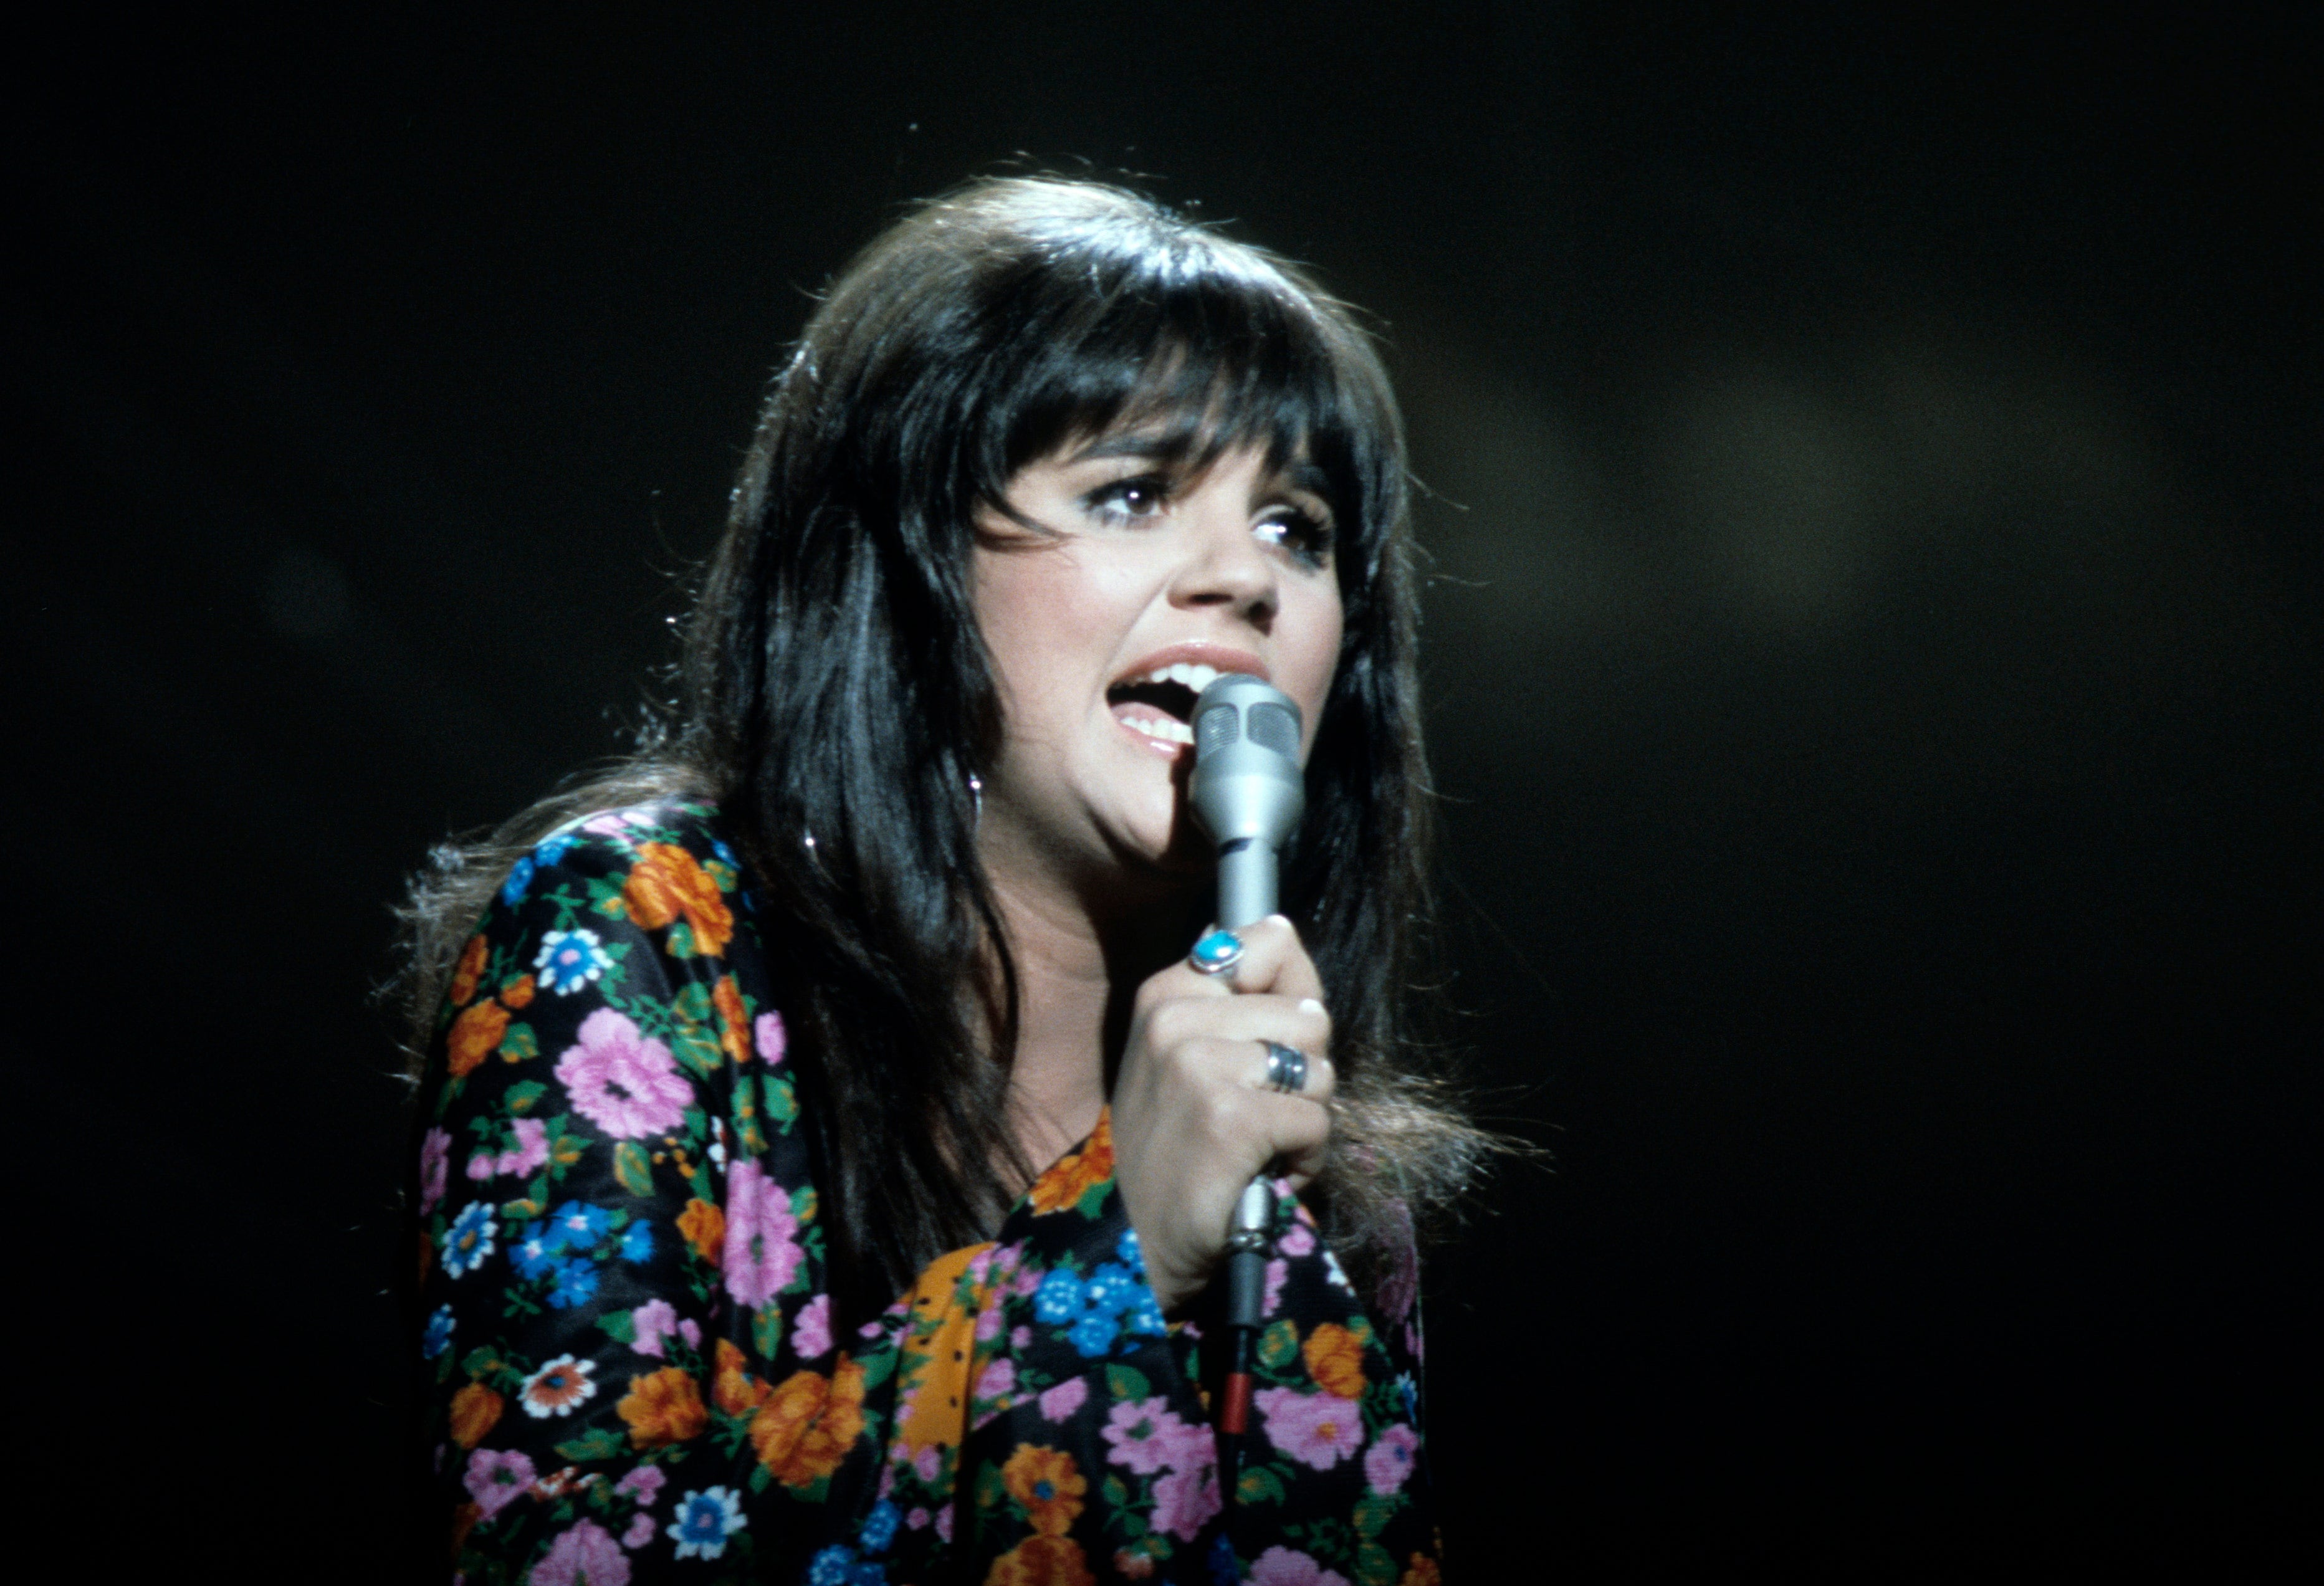 It's been a Long, Long Time for Linda Ronstadt, whose hit song transforms  The Last of Us